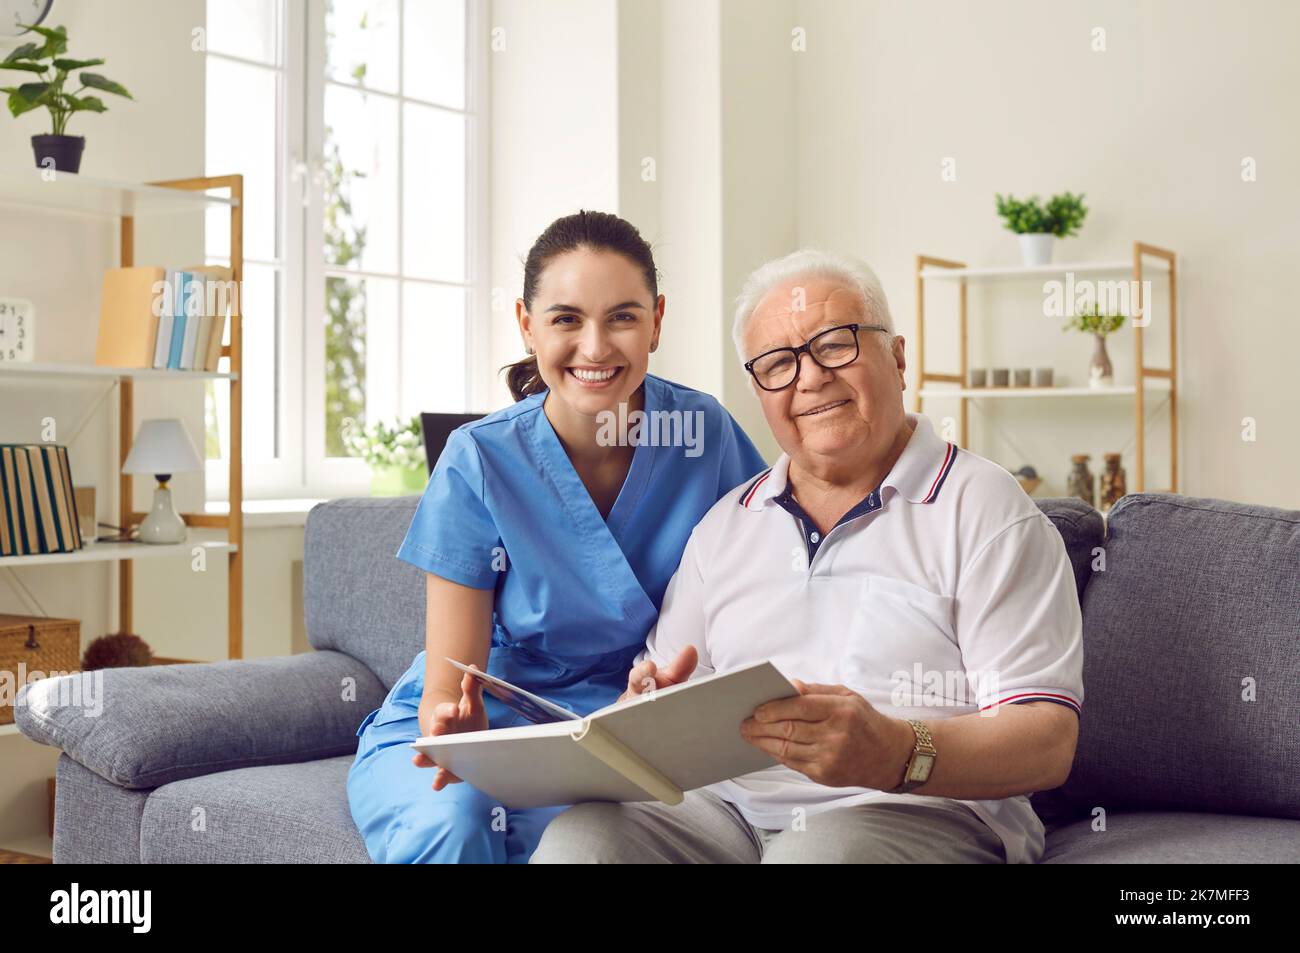 Happy senior man and young female nurse sitting on couch and reading book together Stock Photo